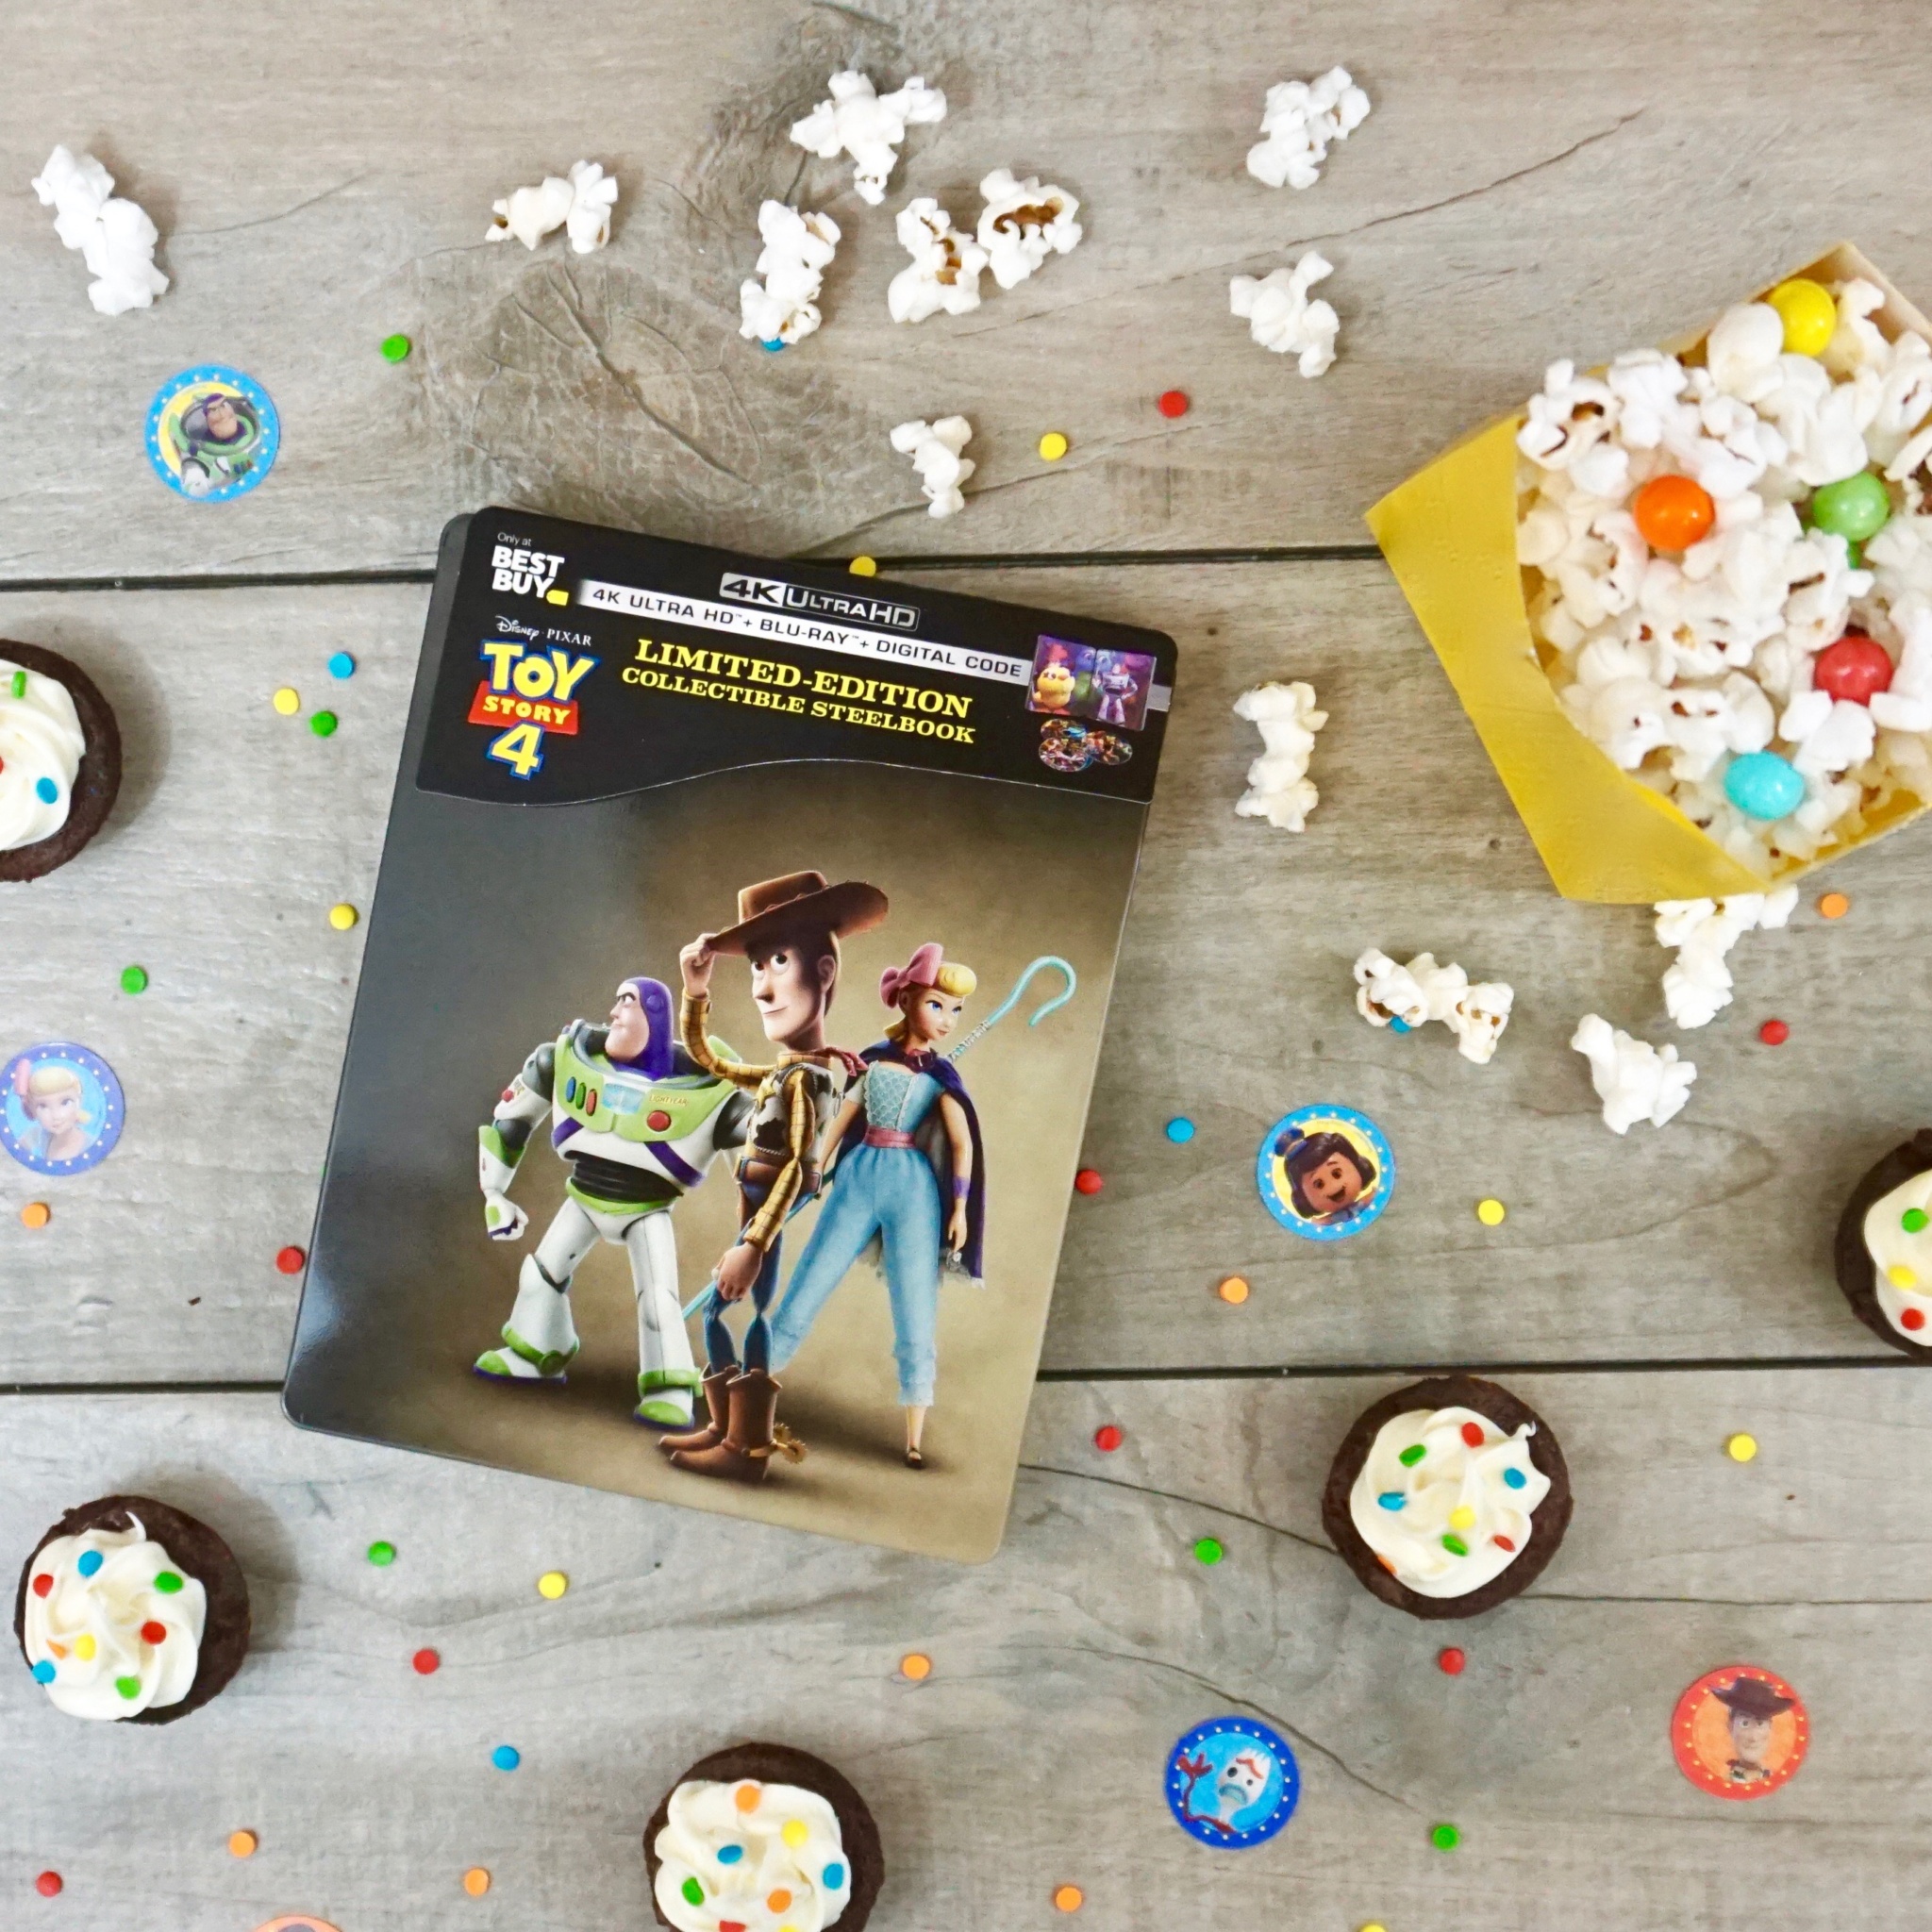 Toy Story 4 Movie night party ideas